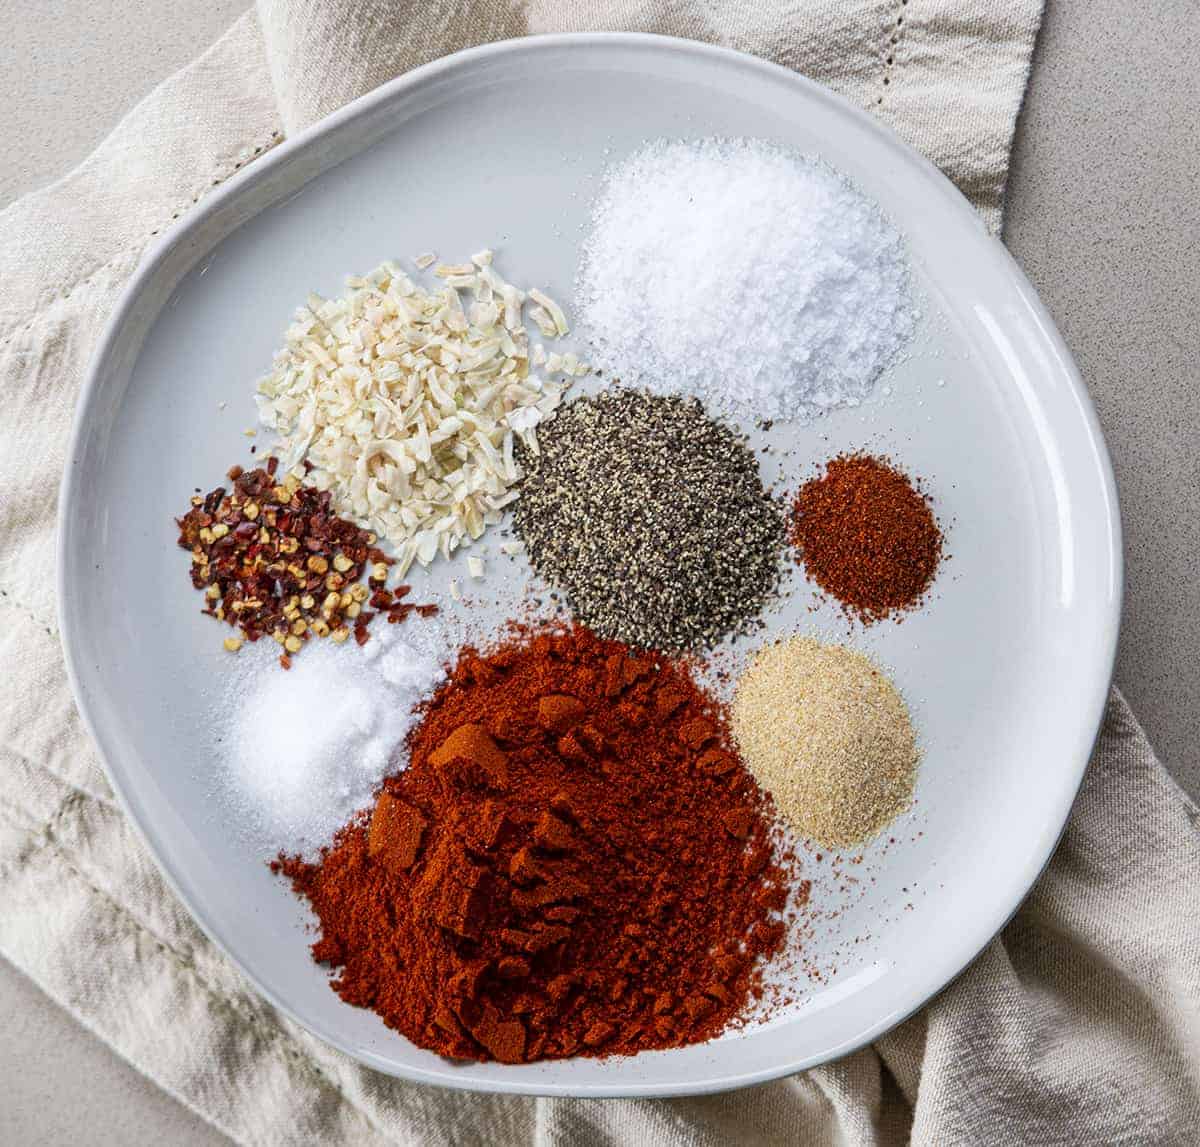 All the Ingredients for Hamburger Seasoning on a Plate